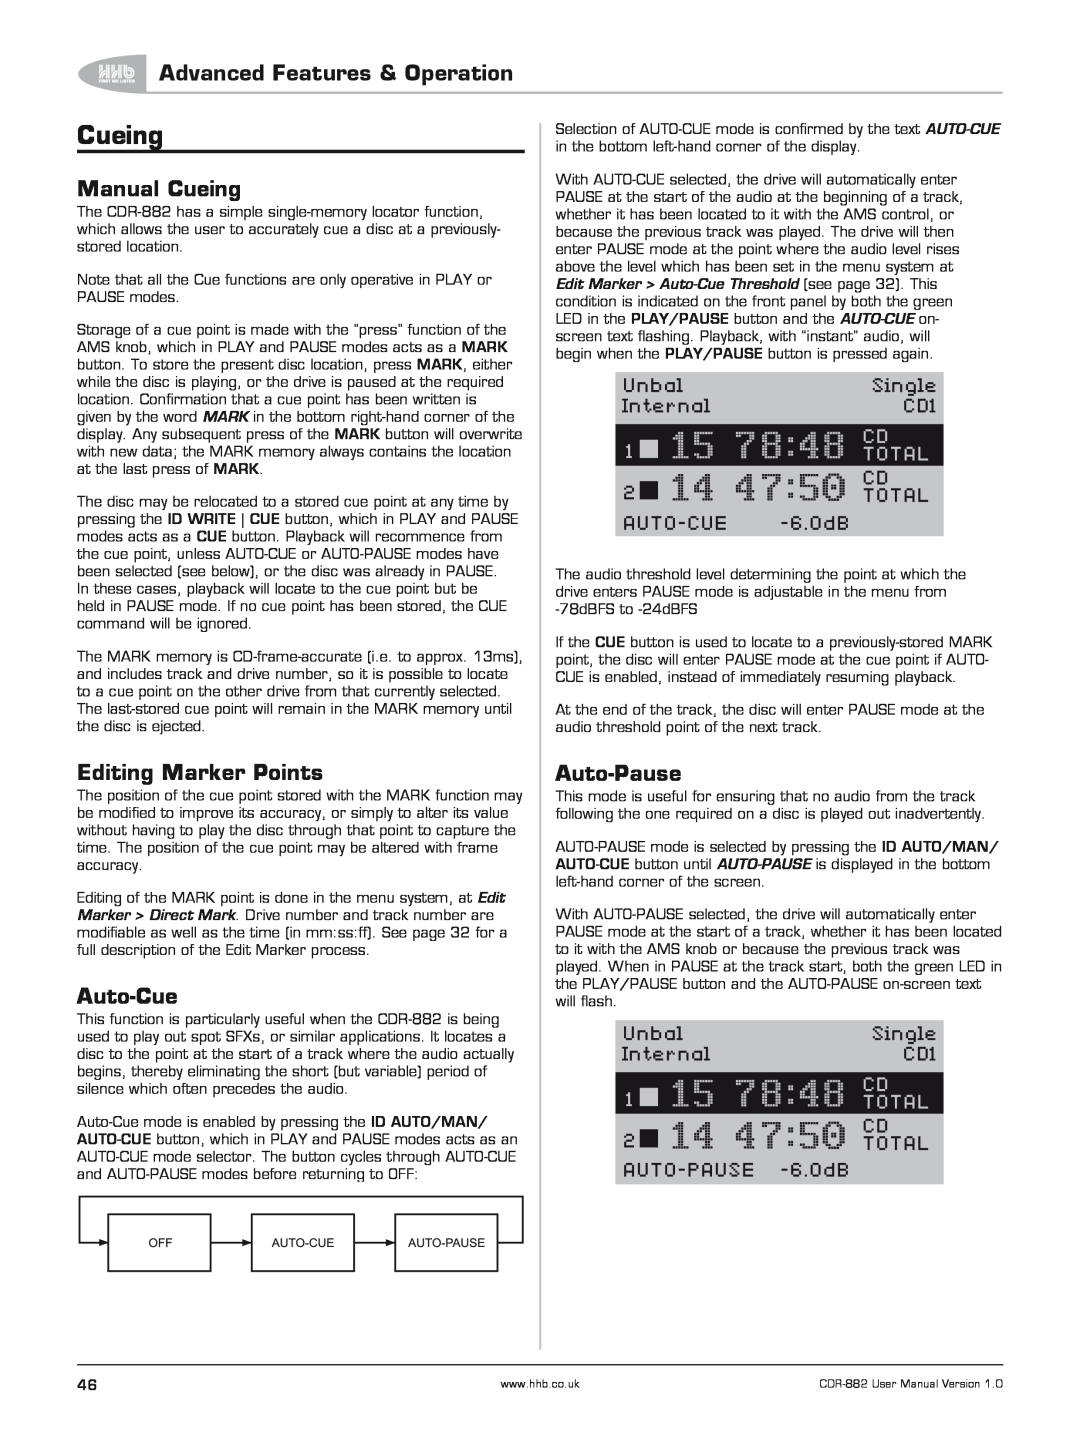 HHB comm CDR-882 user manual Manual Cueing, Editing Marker Points, Auto-Pause, Auto-Cue, Advanced Features & Operation 